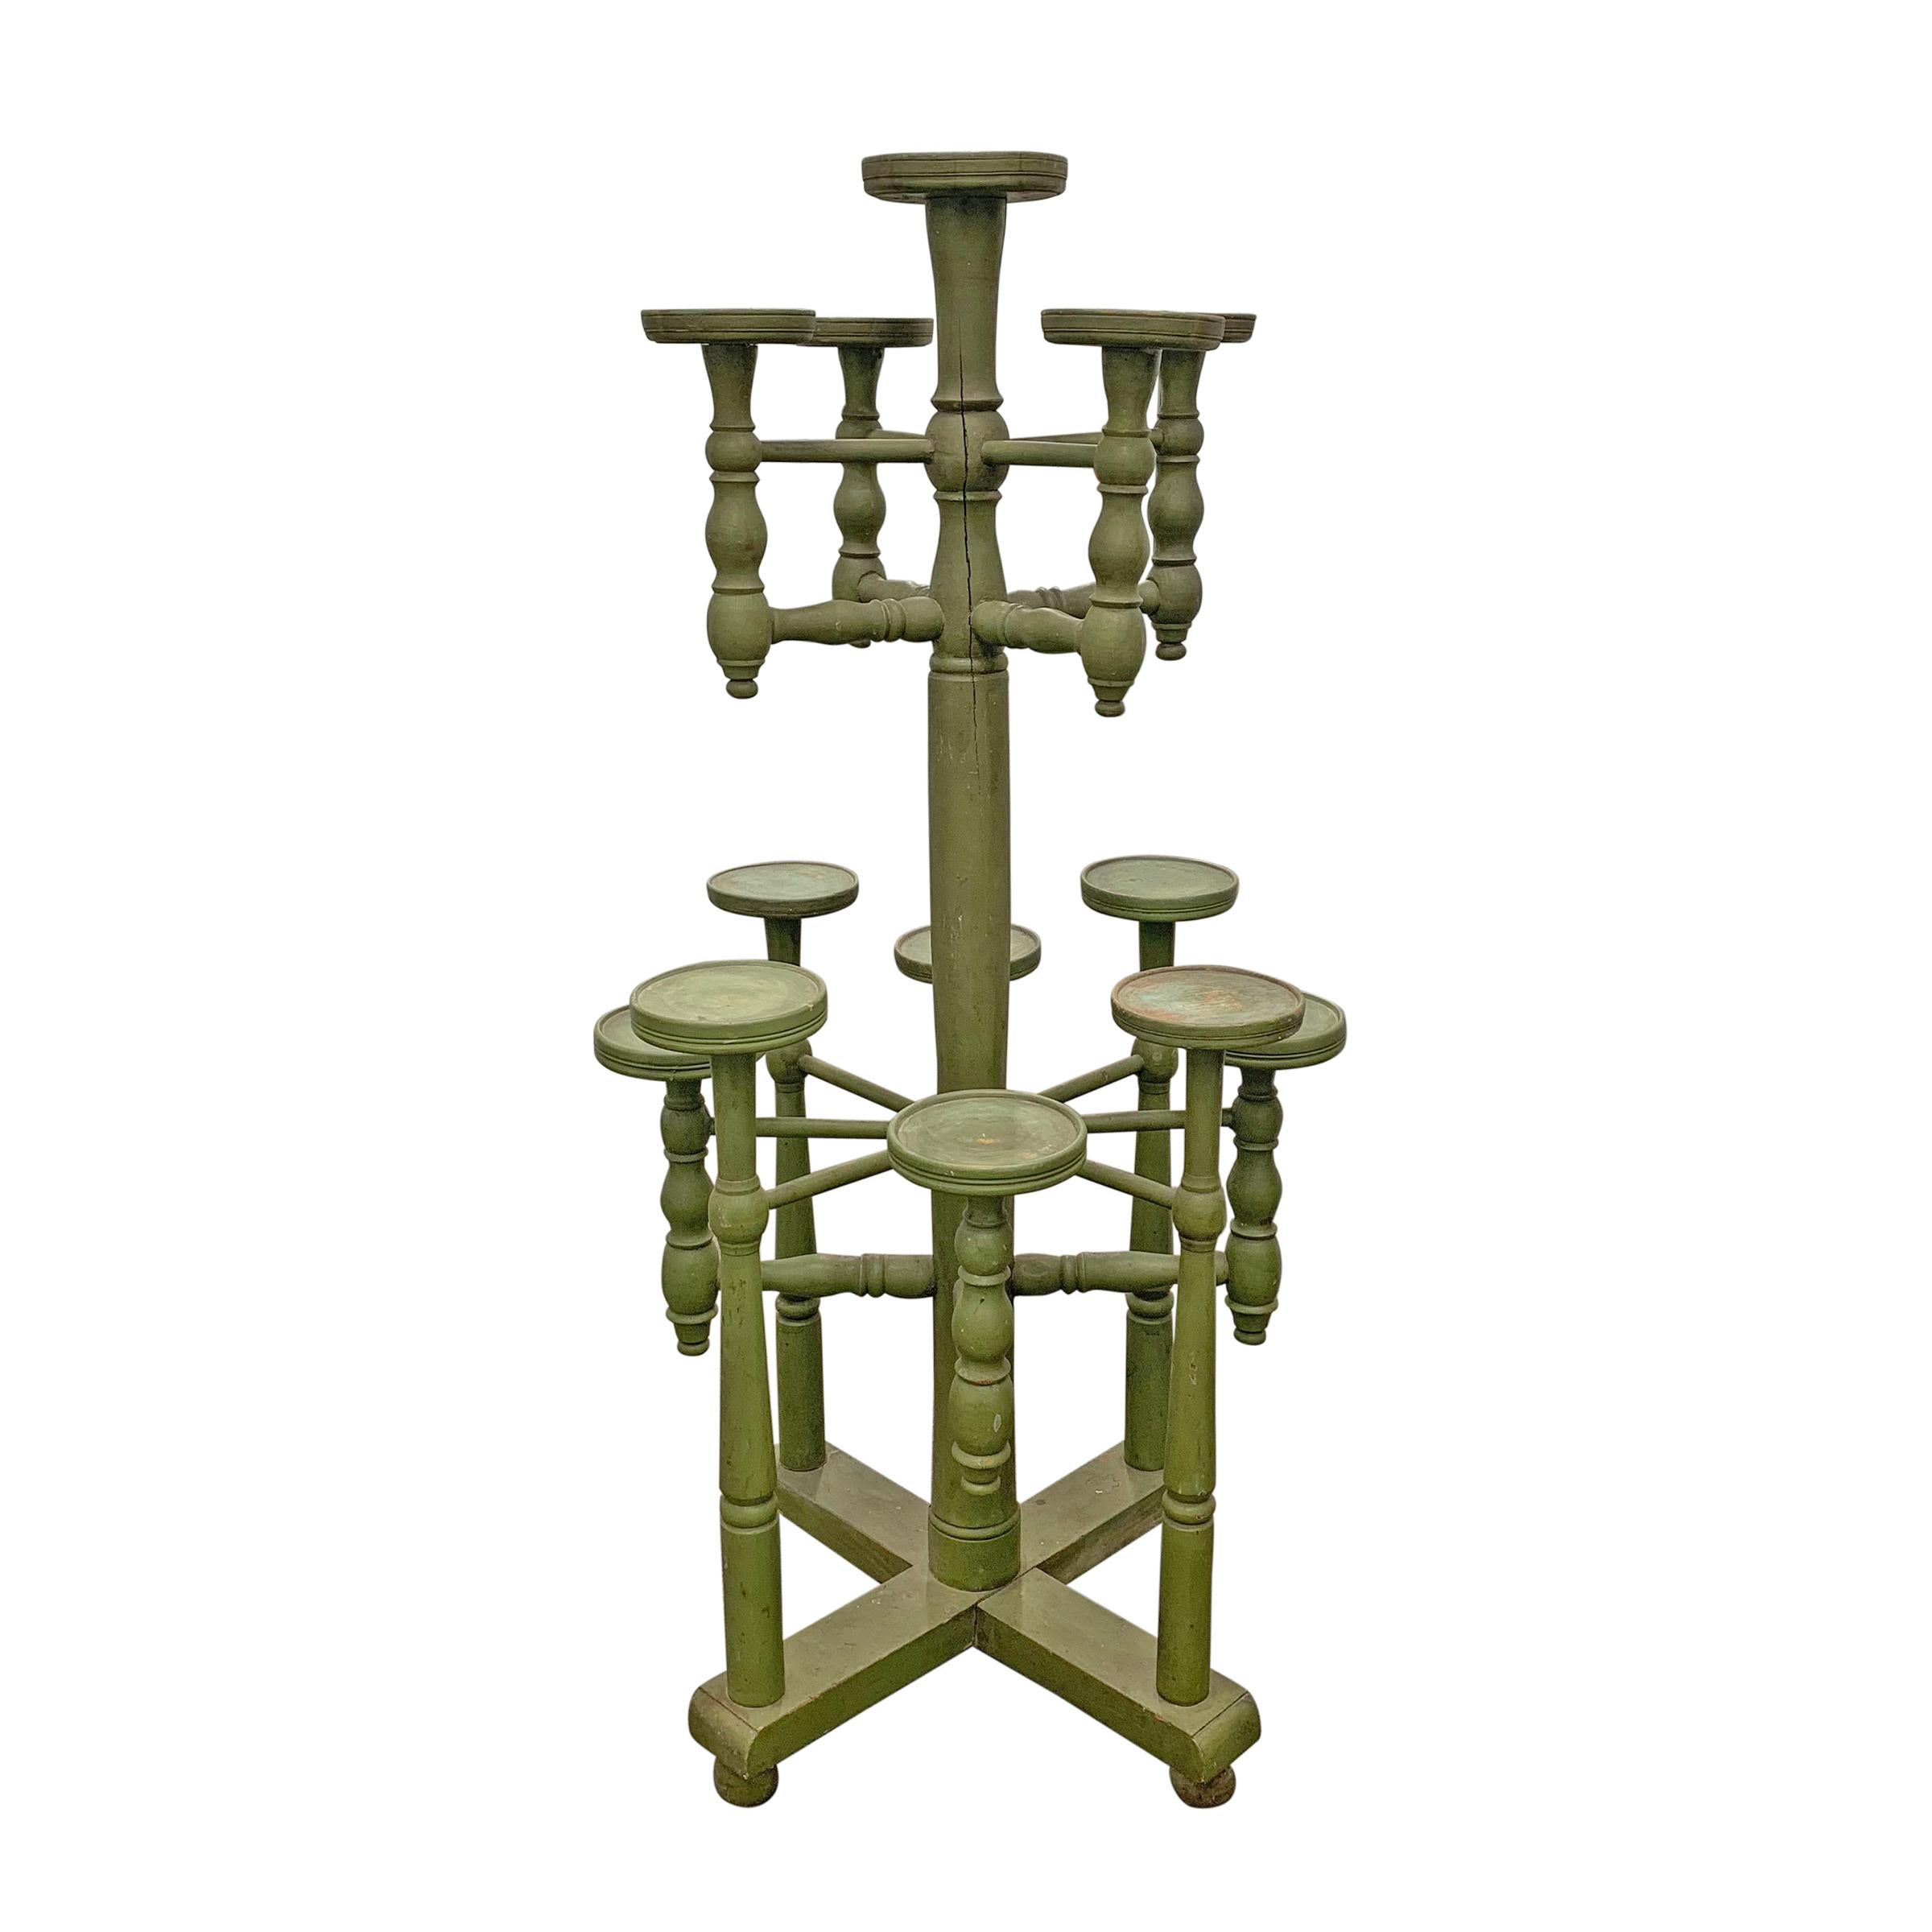 A whimsical 19th century English three-tier plant stand with thirteen arms and retaining its original British racing green paint. Such a fun addition to your sunroom, orangerie, or conservatory.